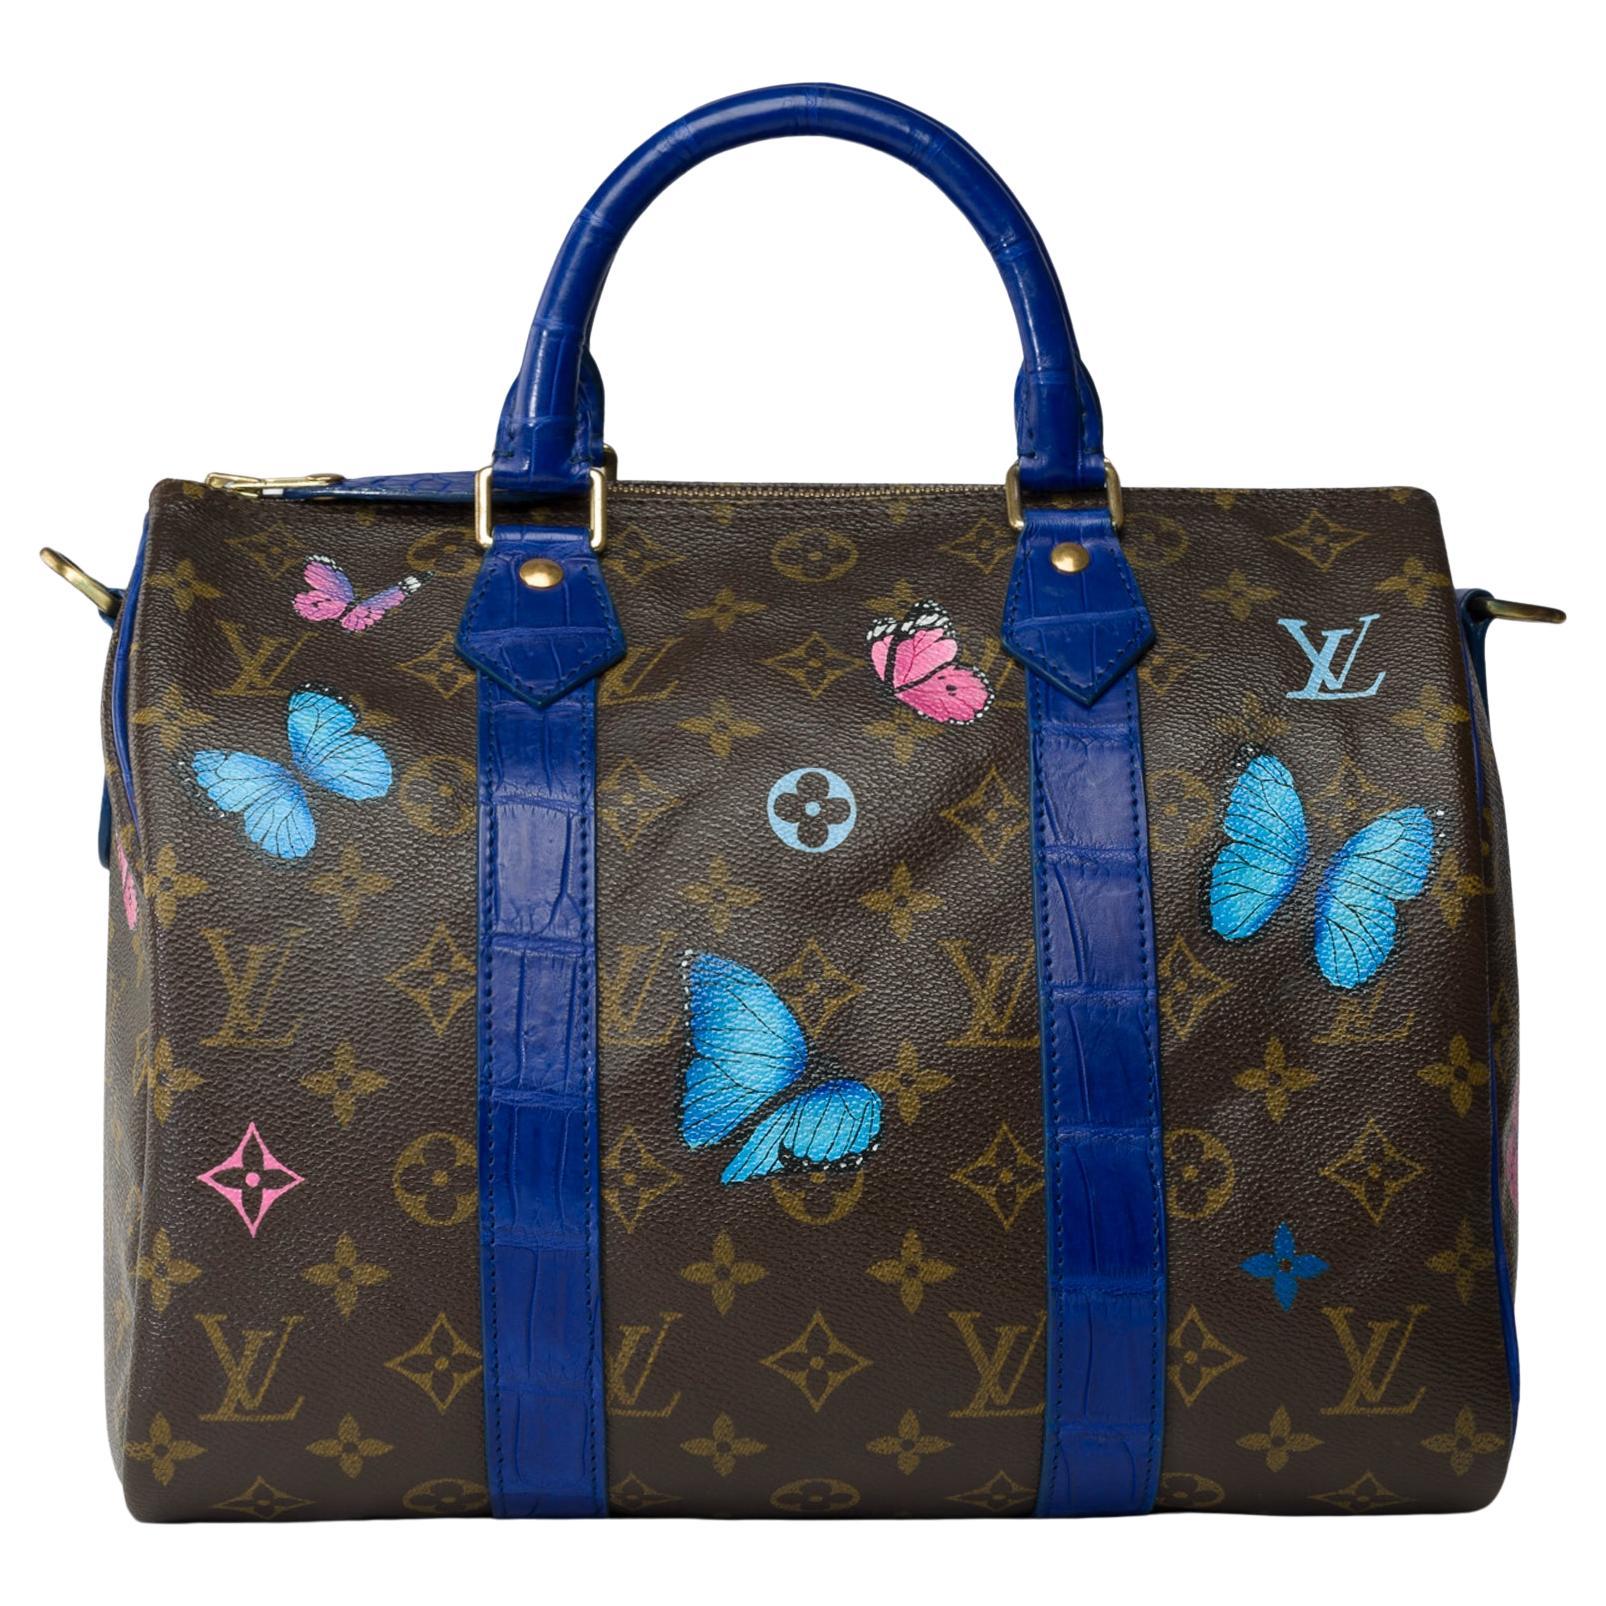 Customized Louis Vuitton Speedy 30 handbag Butterfly with Blue Crocodile leather For Sale